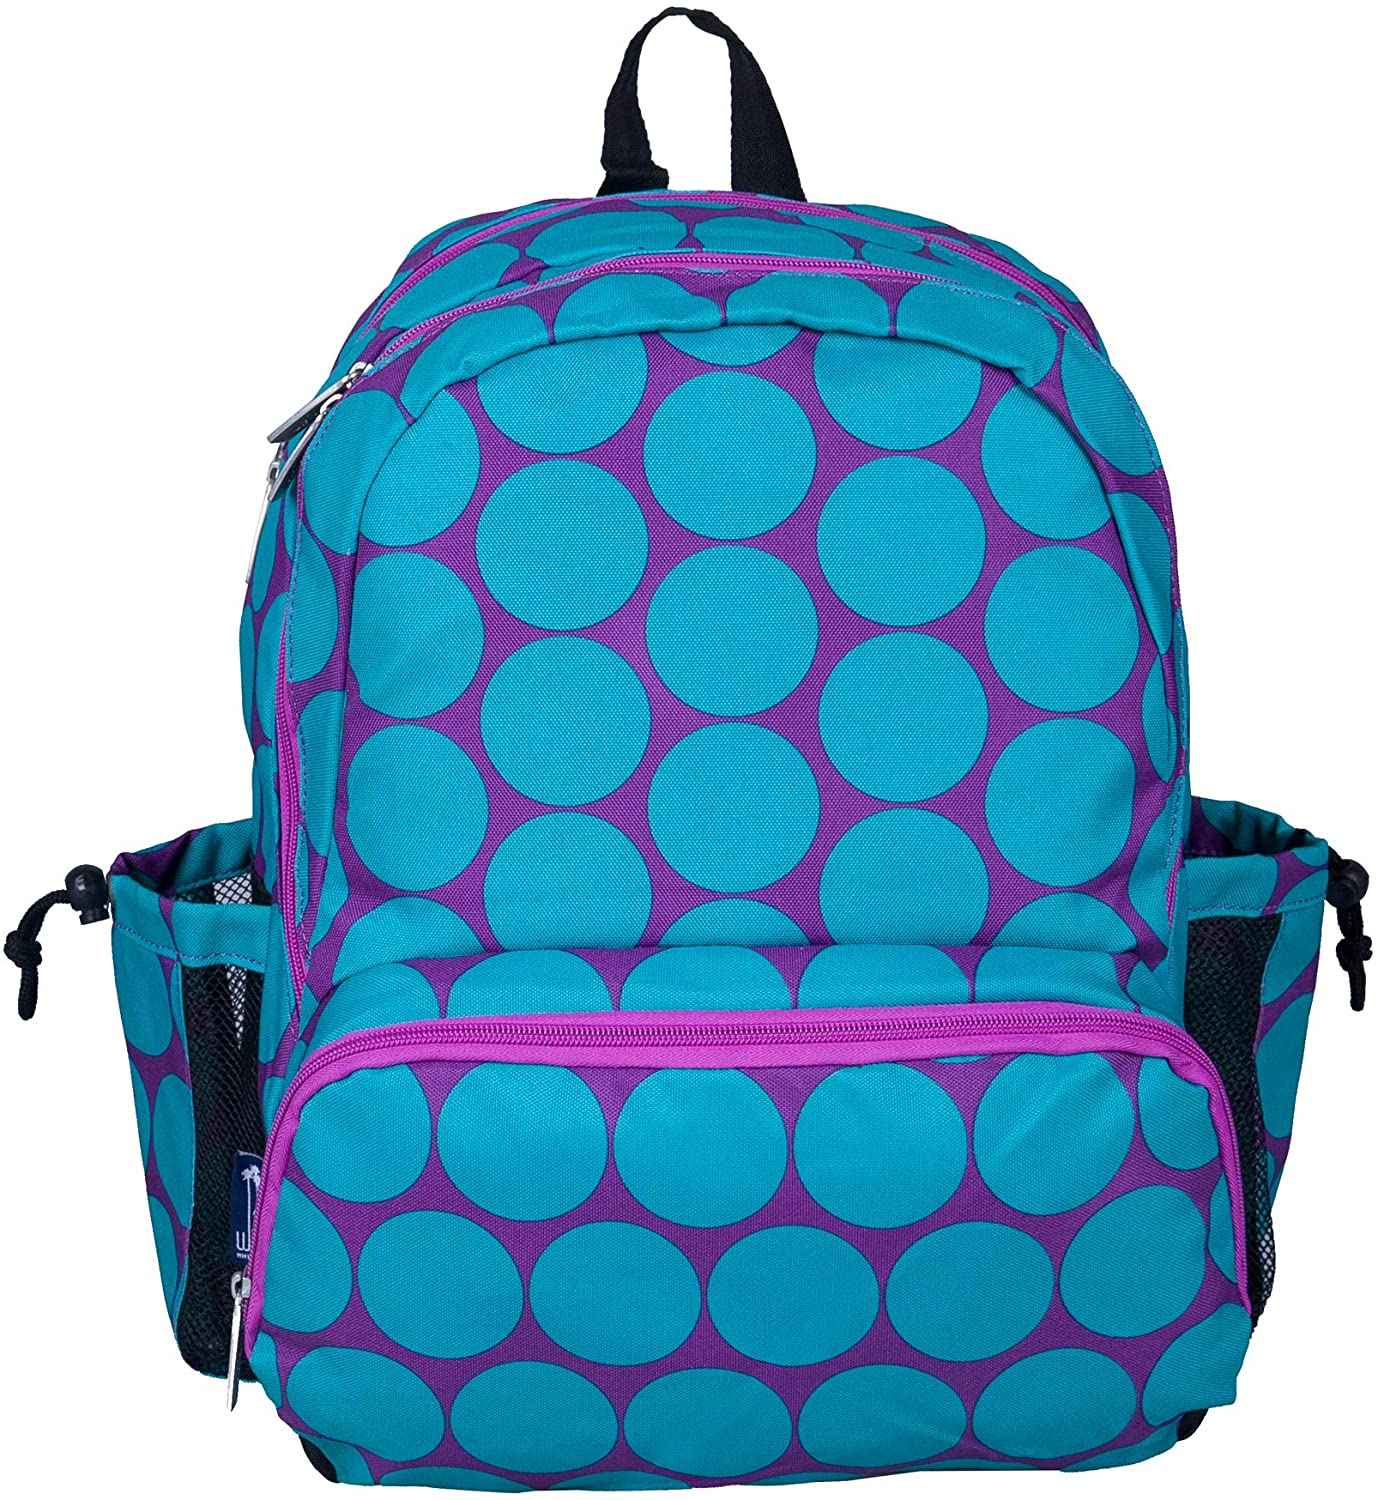 Wildkin Kids 17 Inch Backpack for Boys and Girls, Perfect for School and Travel (Big Dot Aqua) - image 3 of 7